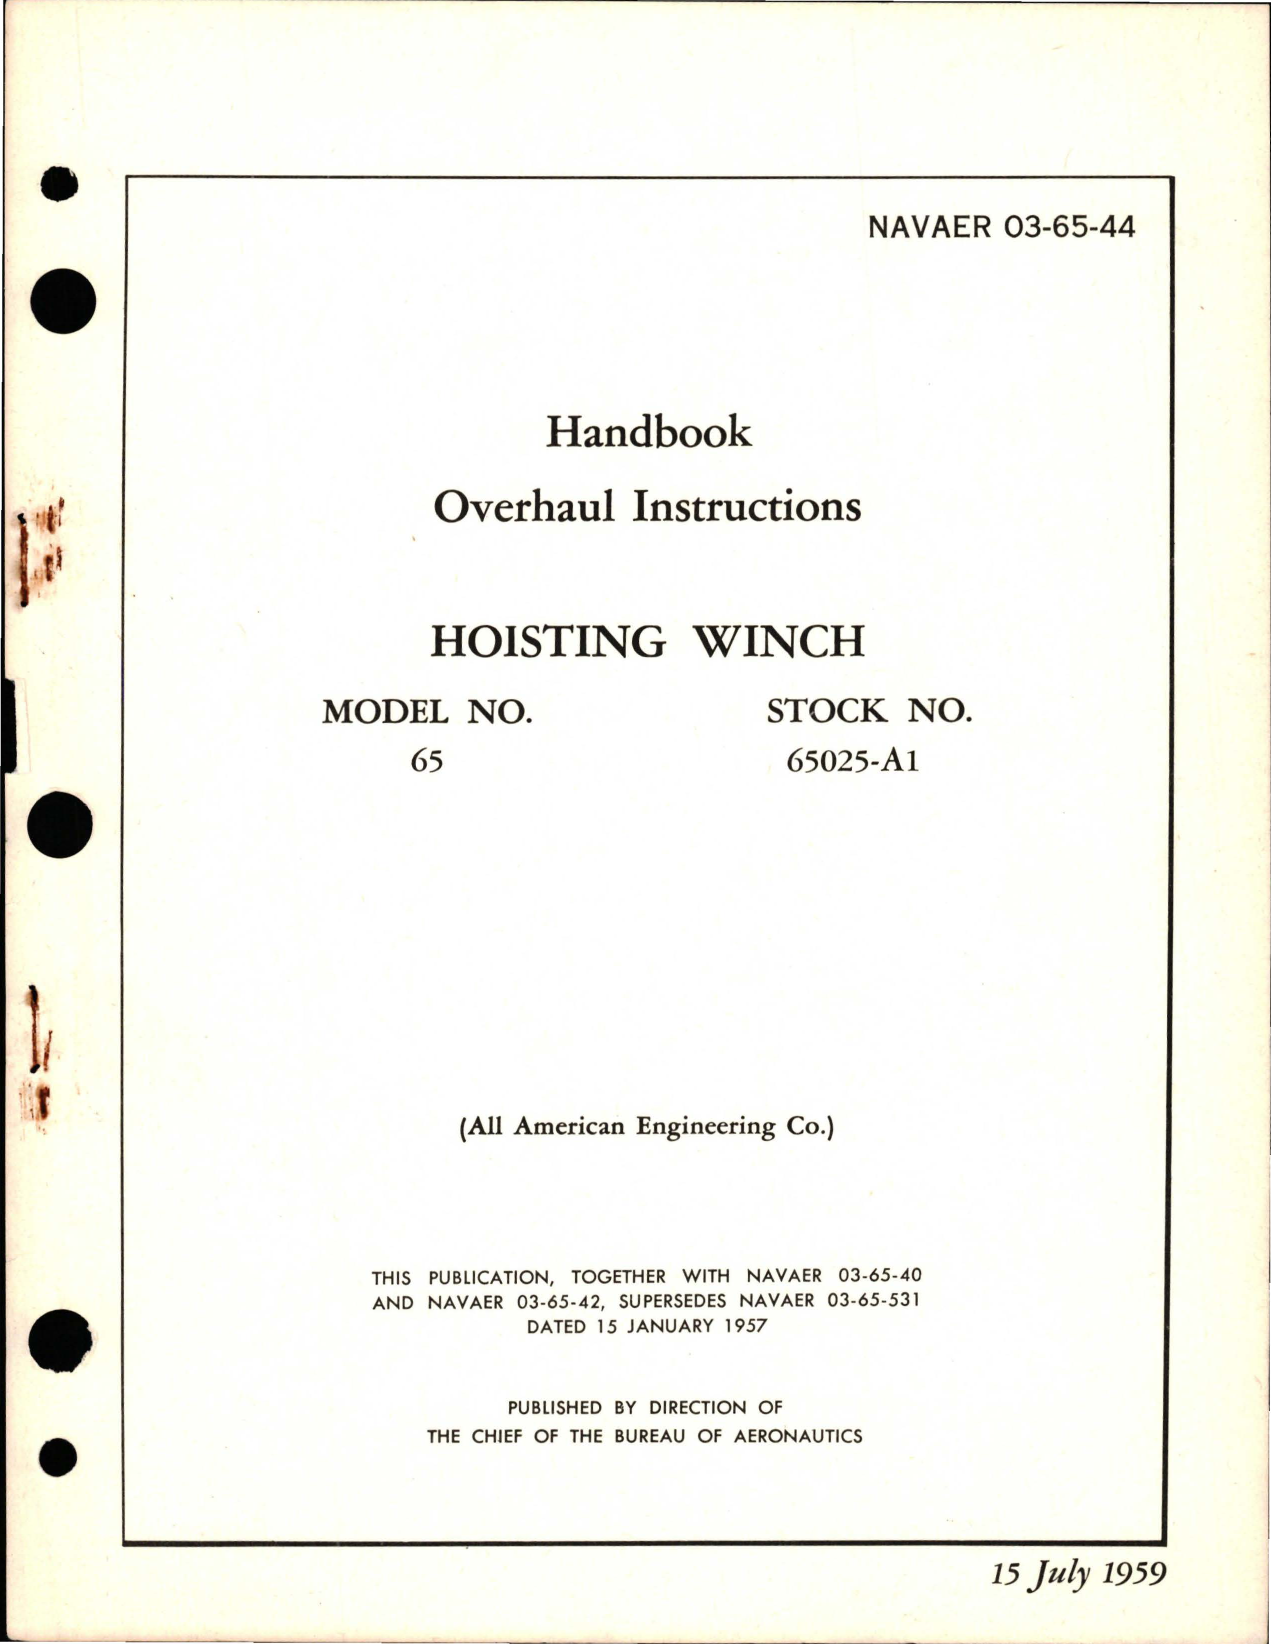 Sample page 1 from AirCorps Library document: Overhaul Instructions for Hoisting Winch - Model 65